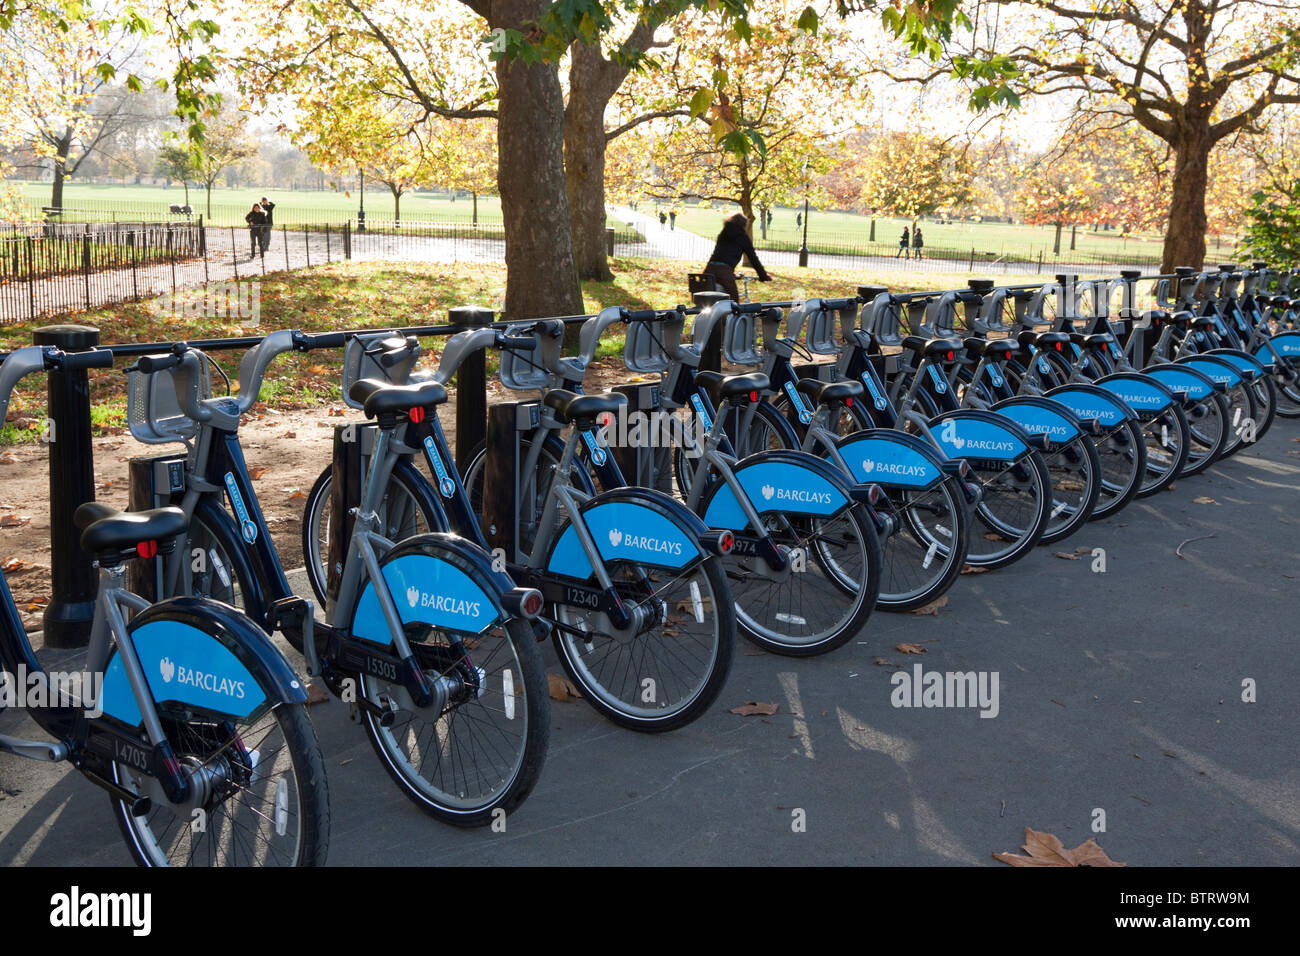 Transport For London's Barclays Cycle Hire docking bay - Hyde Park - London Stock Photo